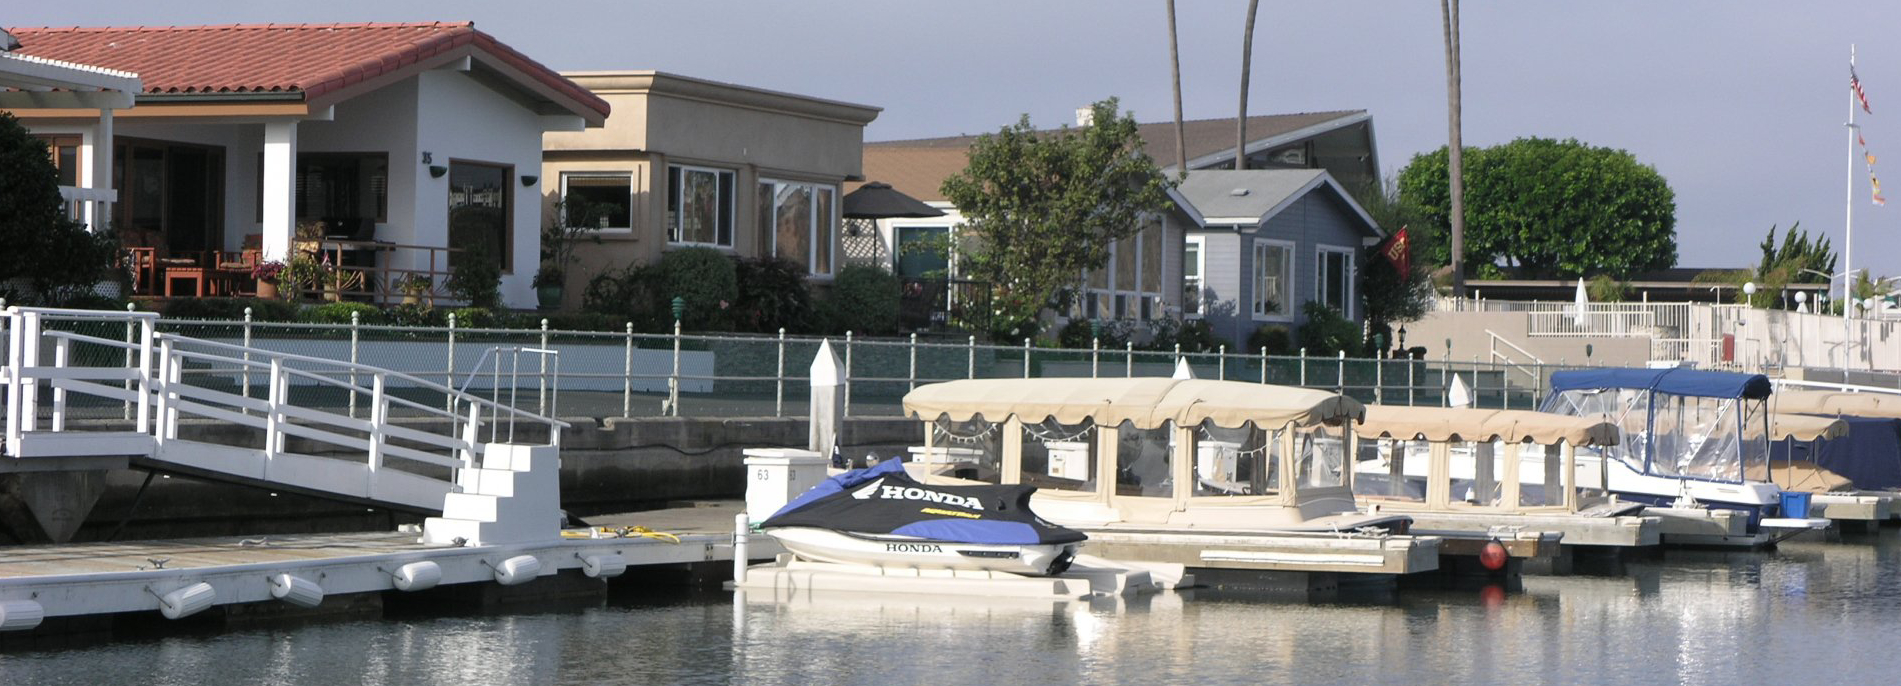 Electric Boats docked in the Marina in front of homes at Bayside Village.